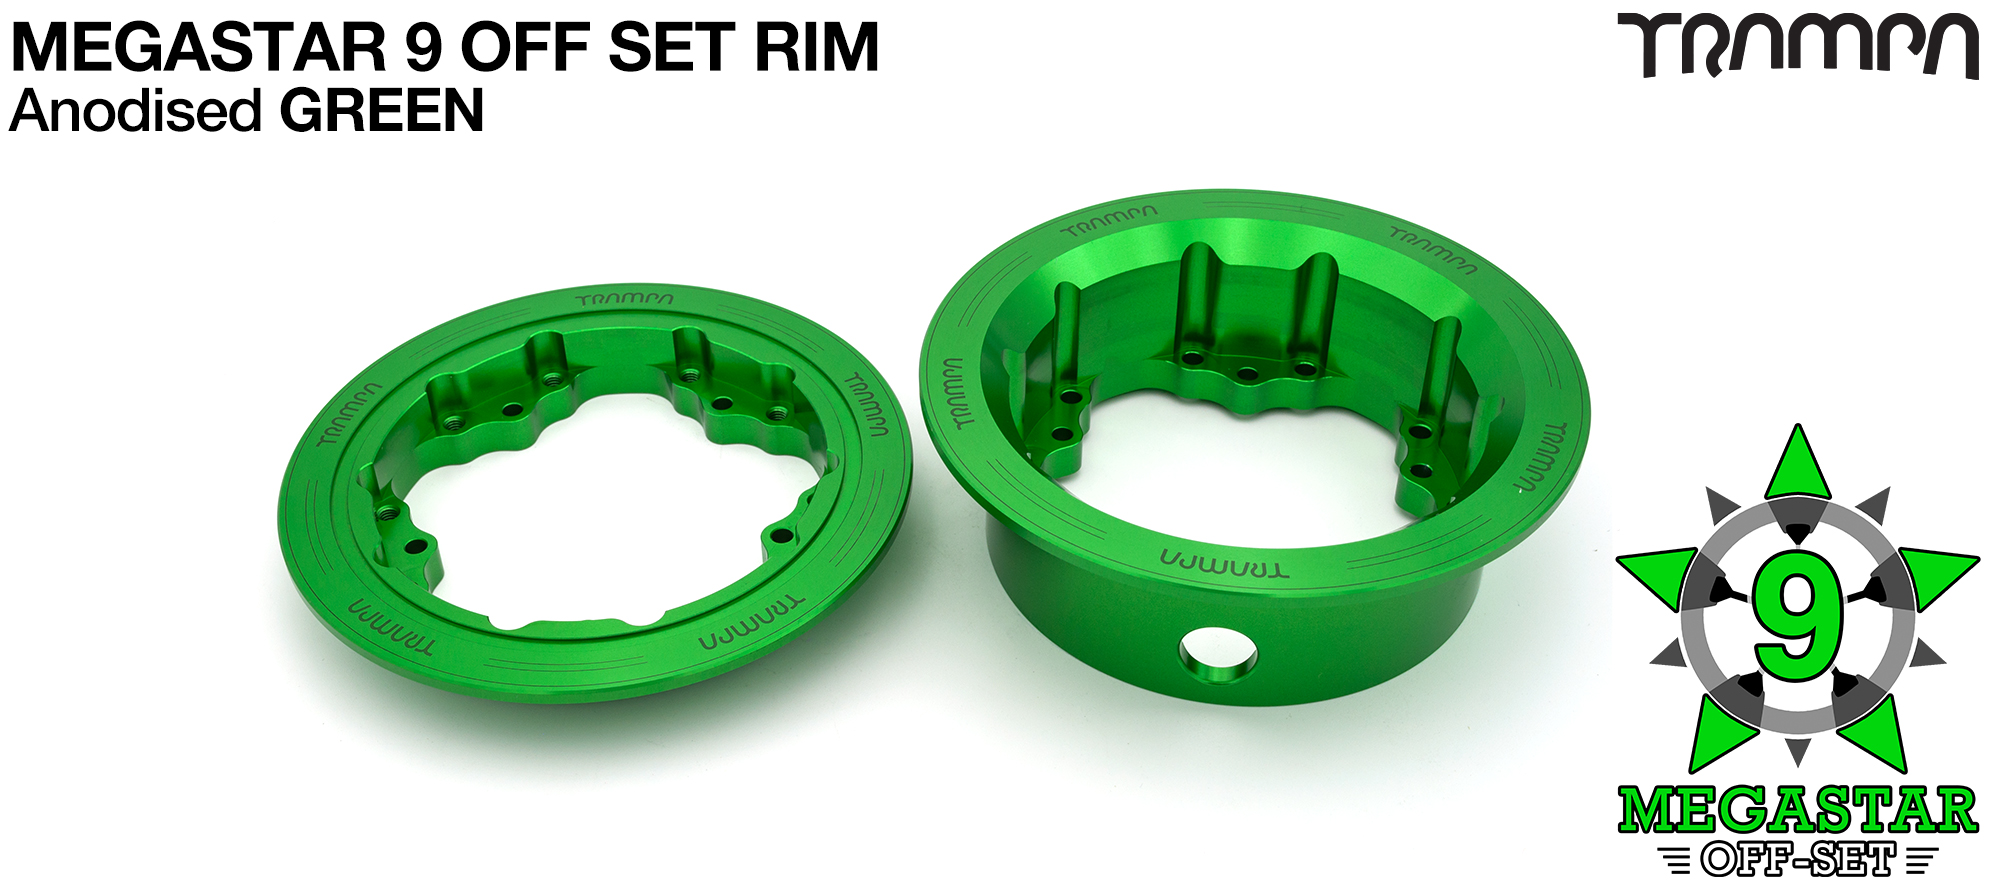 MEGASTAR 9 Rims Measure 3.75/4x 2.5 Inch & the bearings are positioned OFF-SET & accept 3.75 & 4 Inch Rim Tyres - GREEN